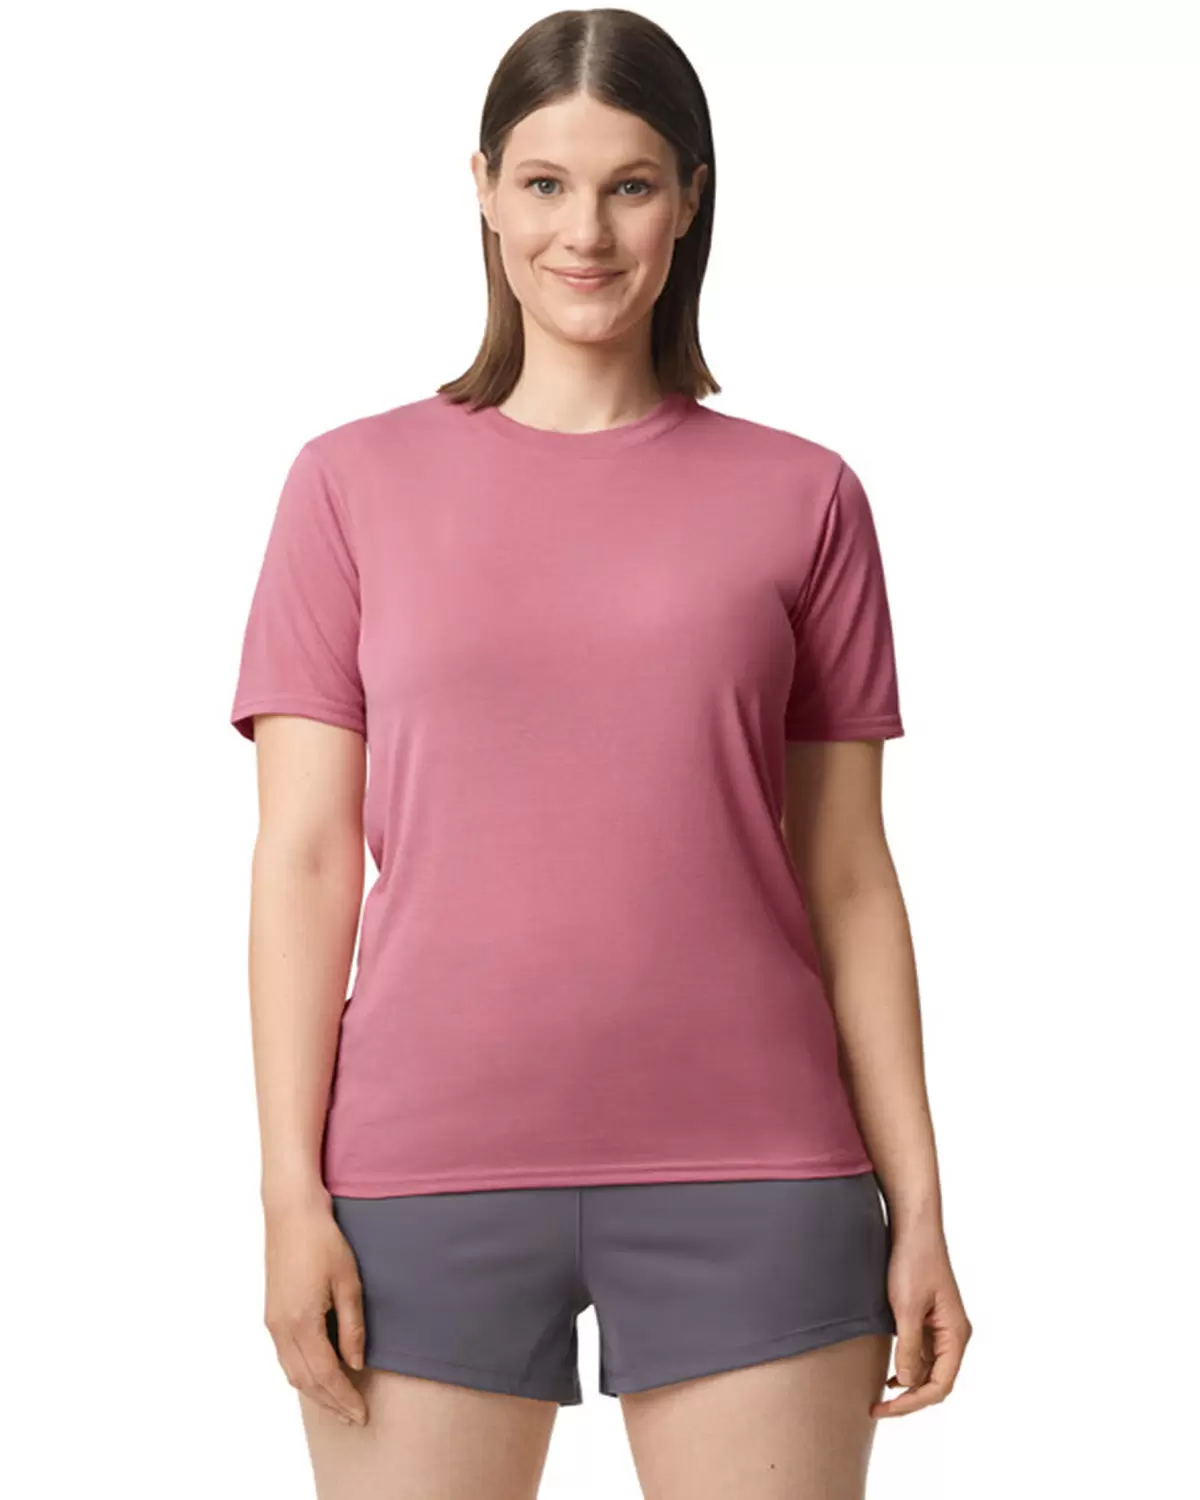 Blank Safety Pink Apparel Bulk Discount At $99